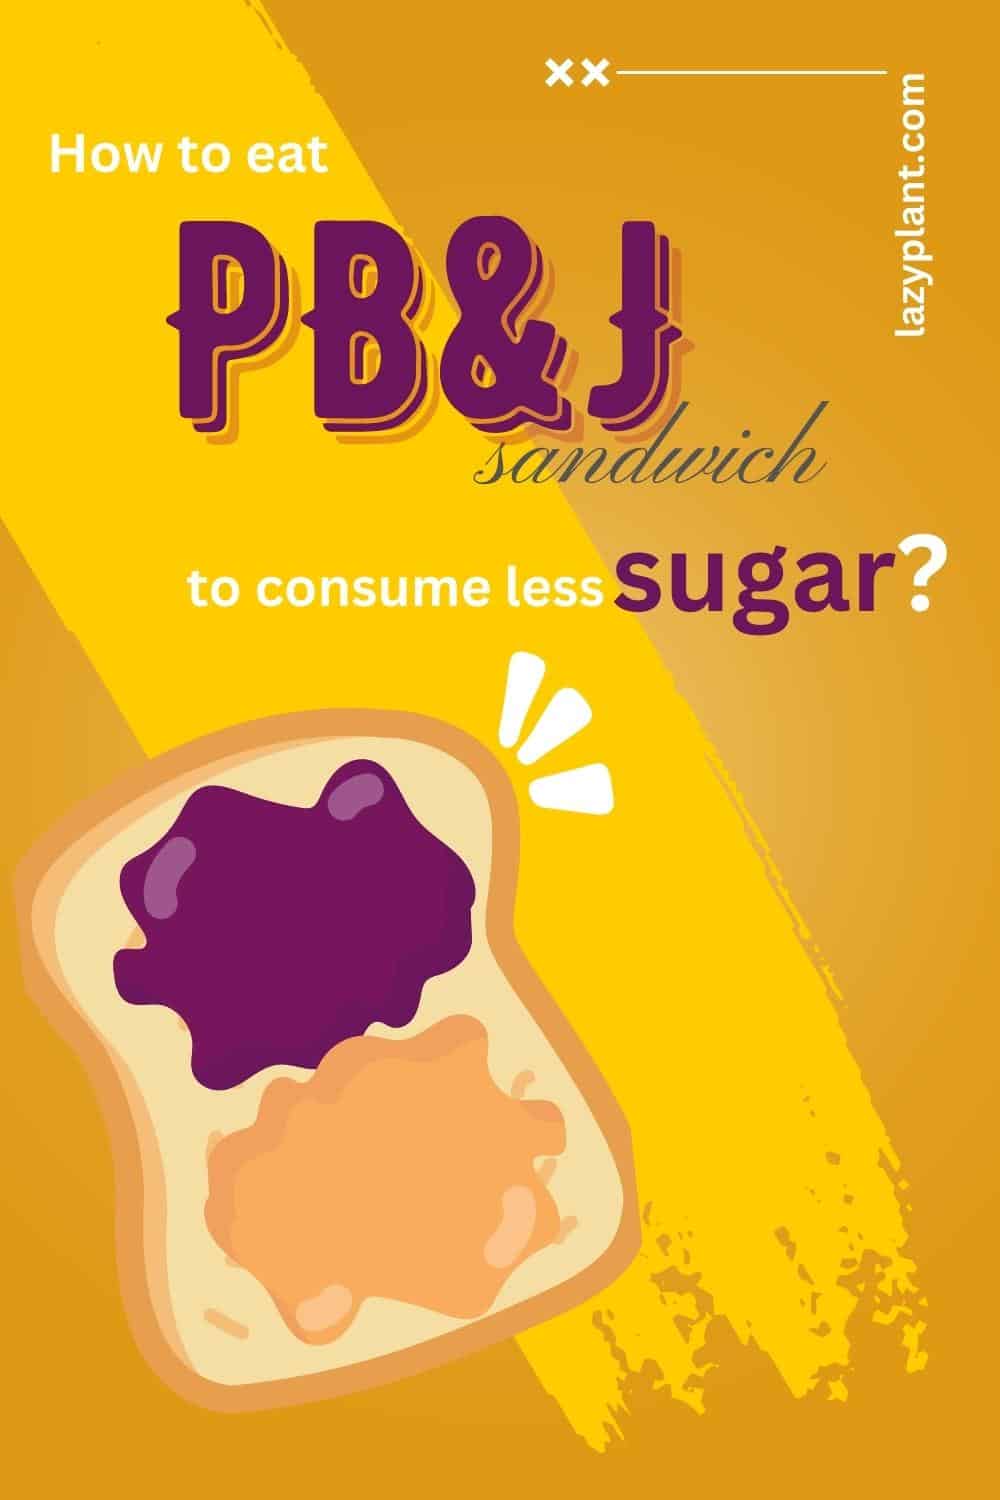 How to eat your favorite PB&J sandwich to consume 80% less sugar?